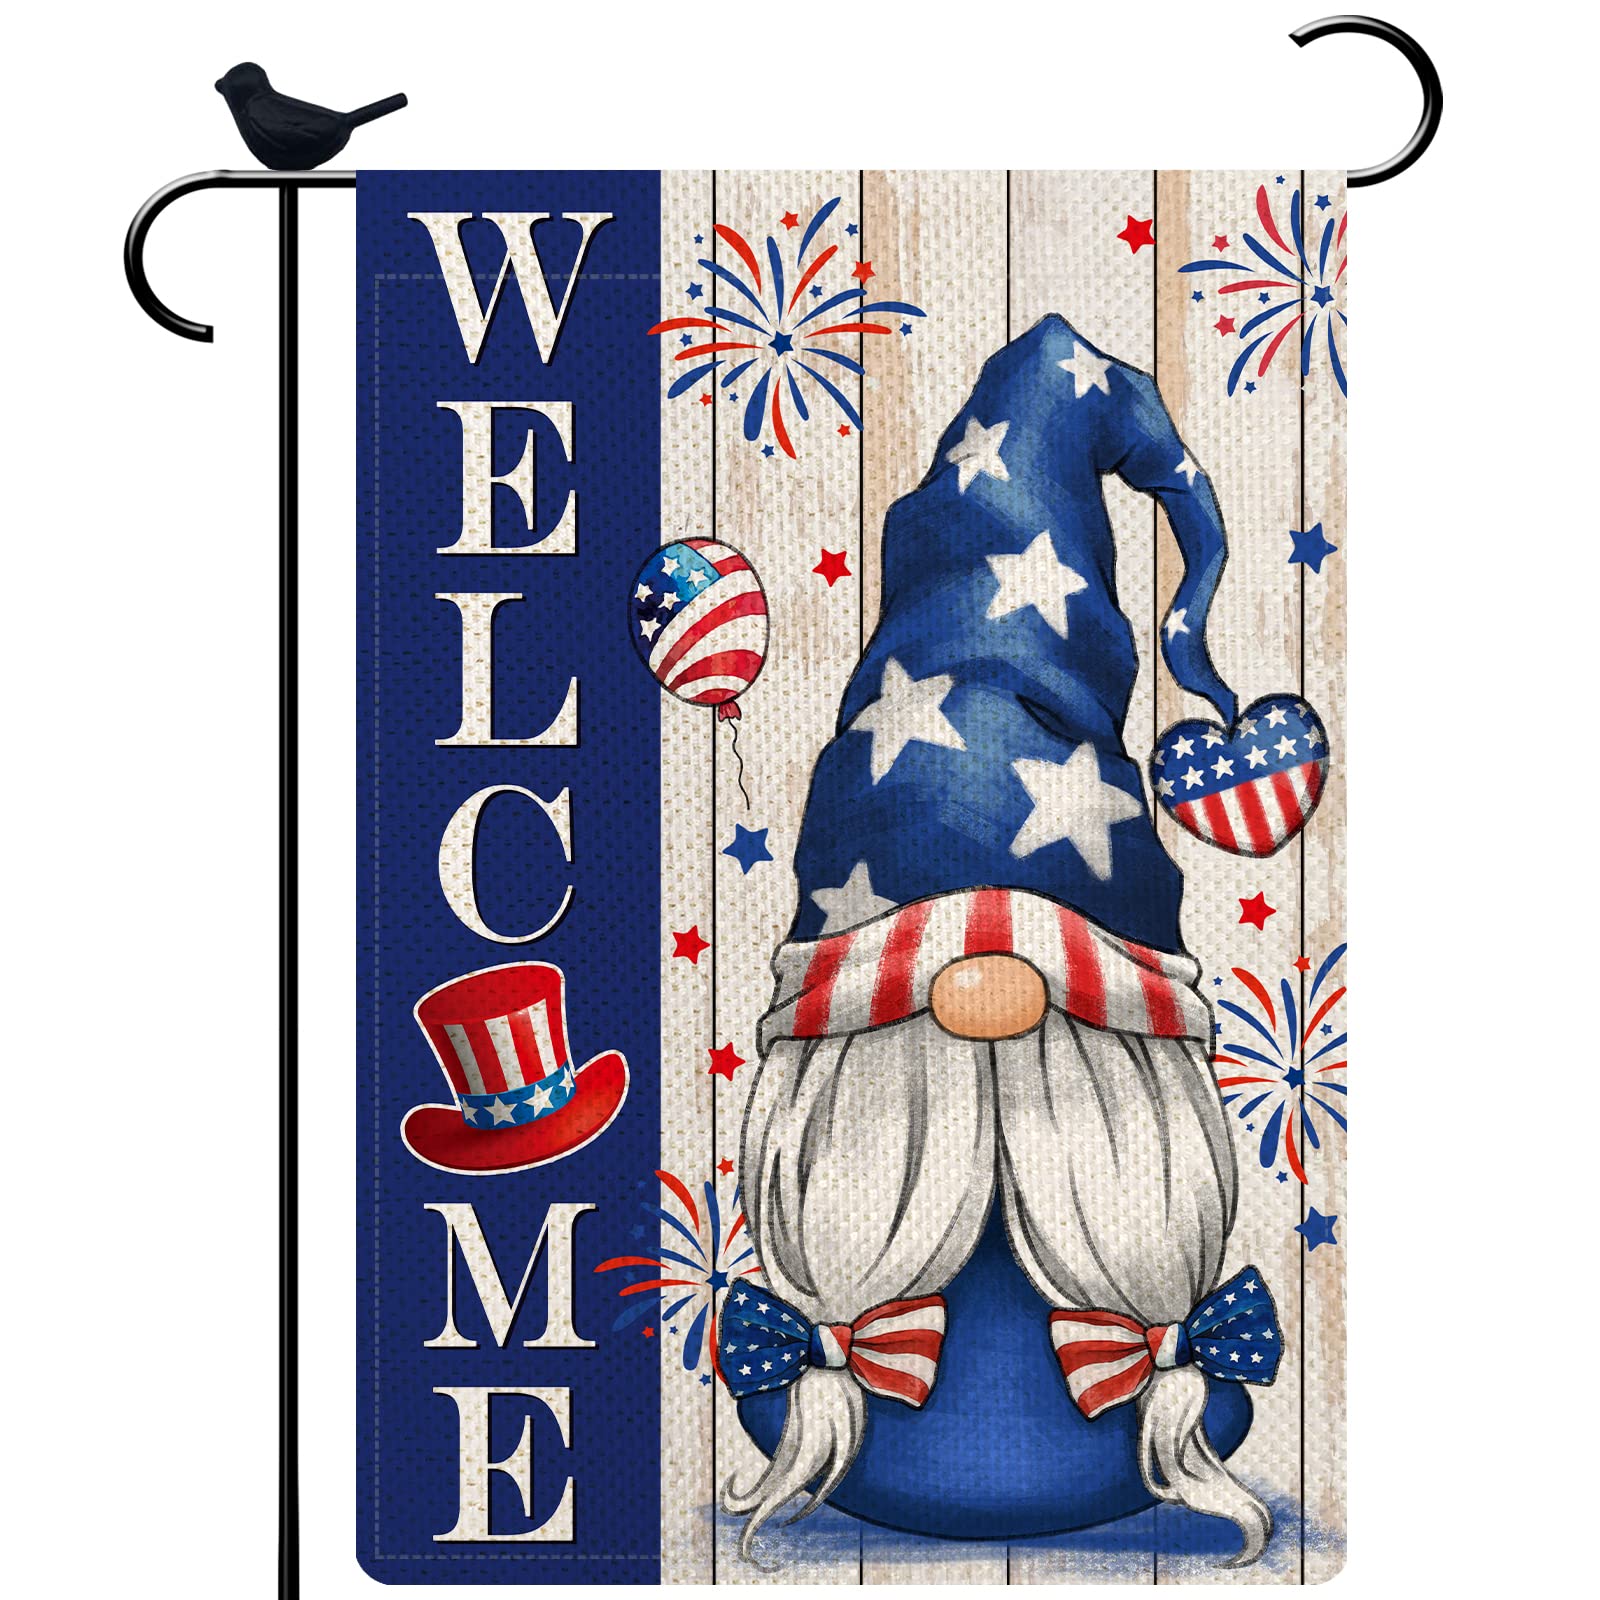 PIPISASA Patriotic American Star and Strip Floral Welcome Gnome Garden Flag